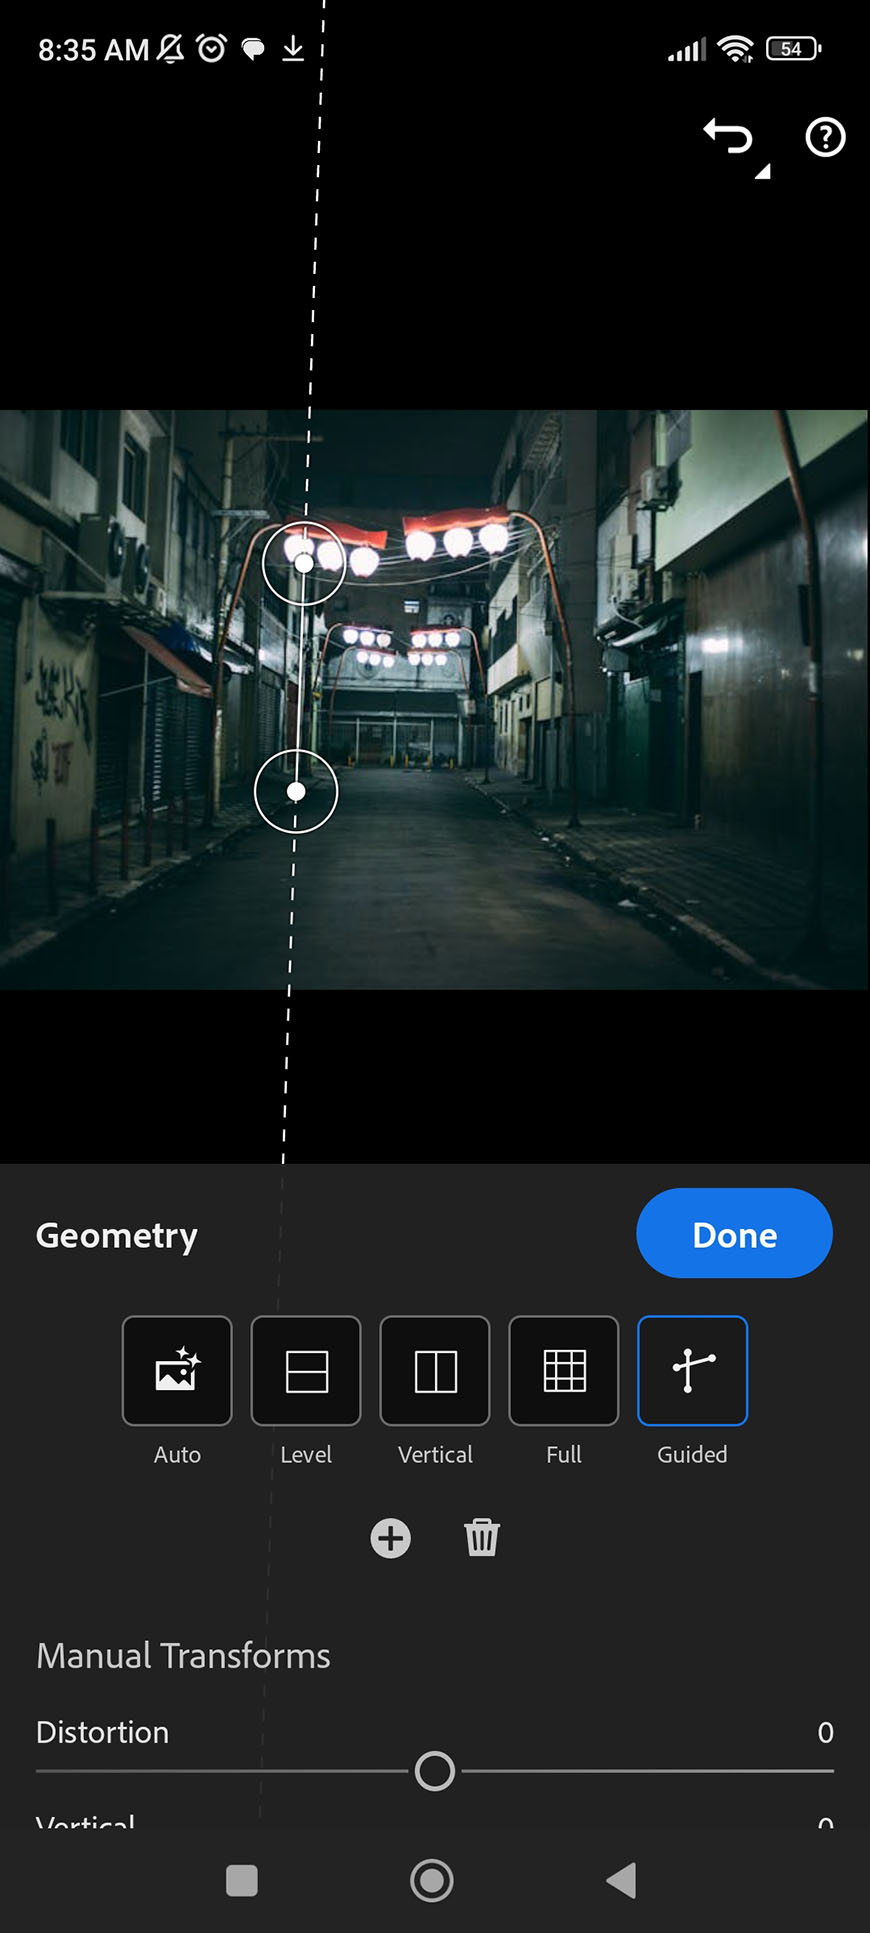 A screenshot of a smartphone editing interface adjusting the geometry of a nighttime photo of an alleyway.